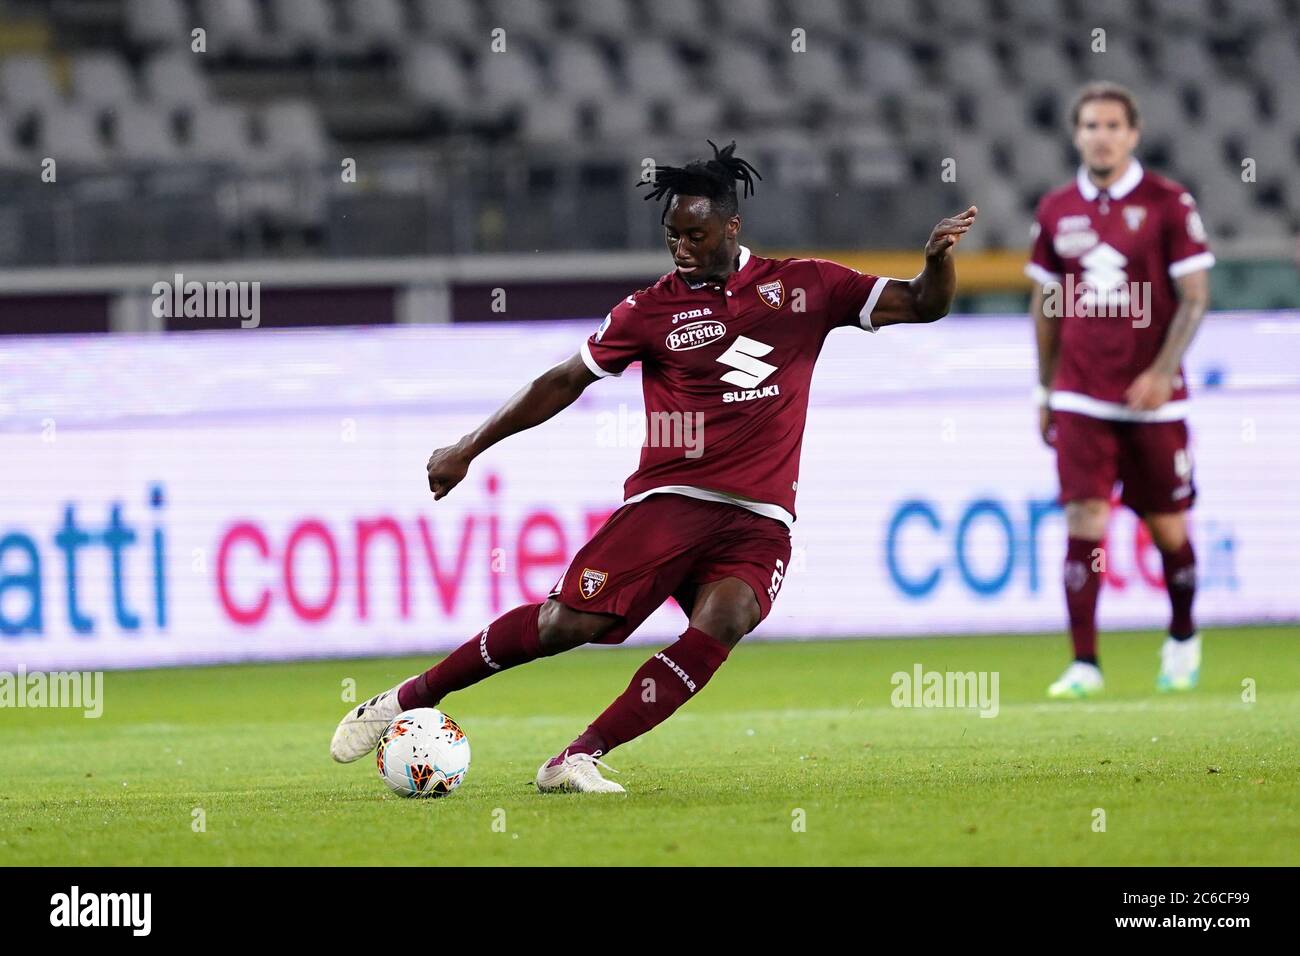 Torino (Italy) 08th June 2020. Italian Seria A. Soualiho Meite of Torino FC in action   during the the Serie A match  between Torino Fc and Brescia Calcio.  Torino Fc wins 3-1 over Brescia Calcio. Credit: Marco Canoniero/Alamy Live News Stock Photo